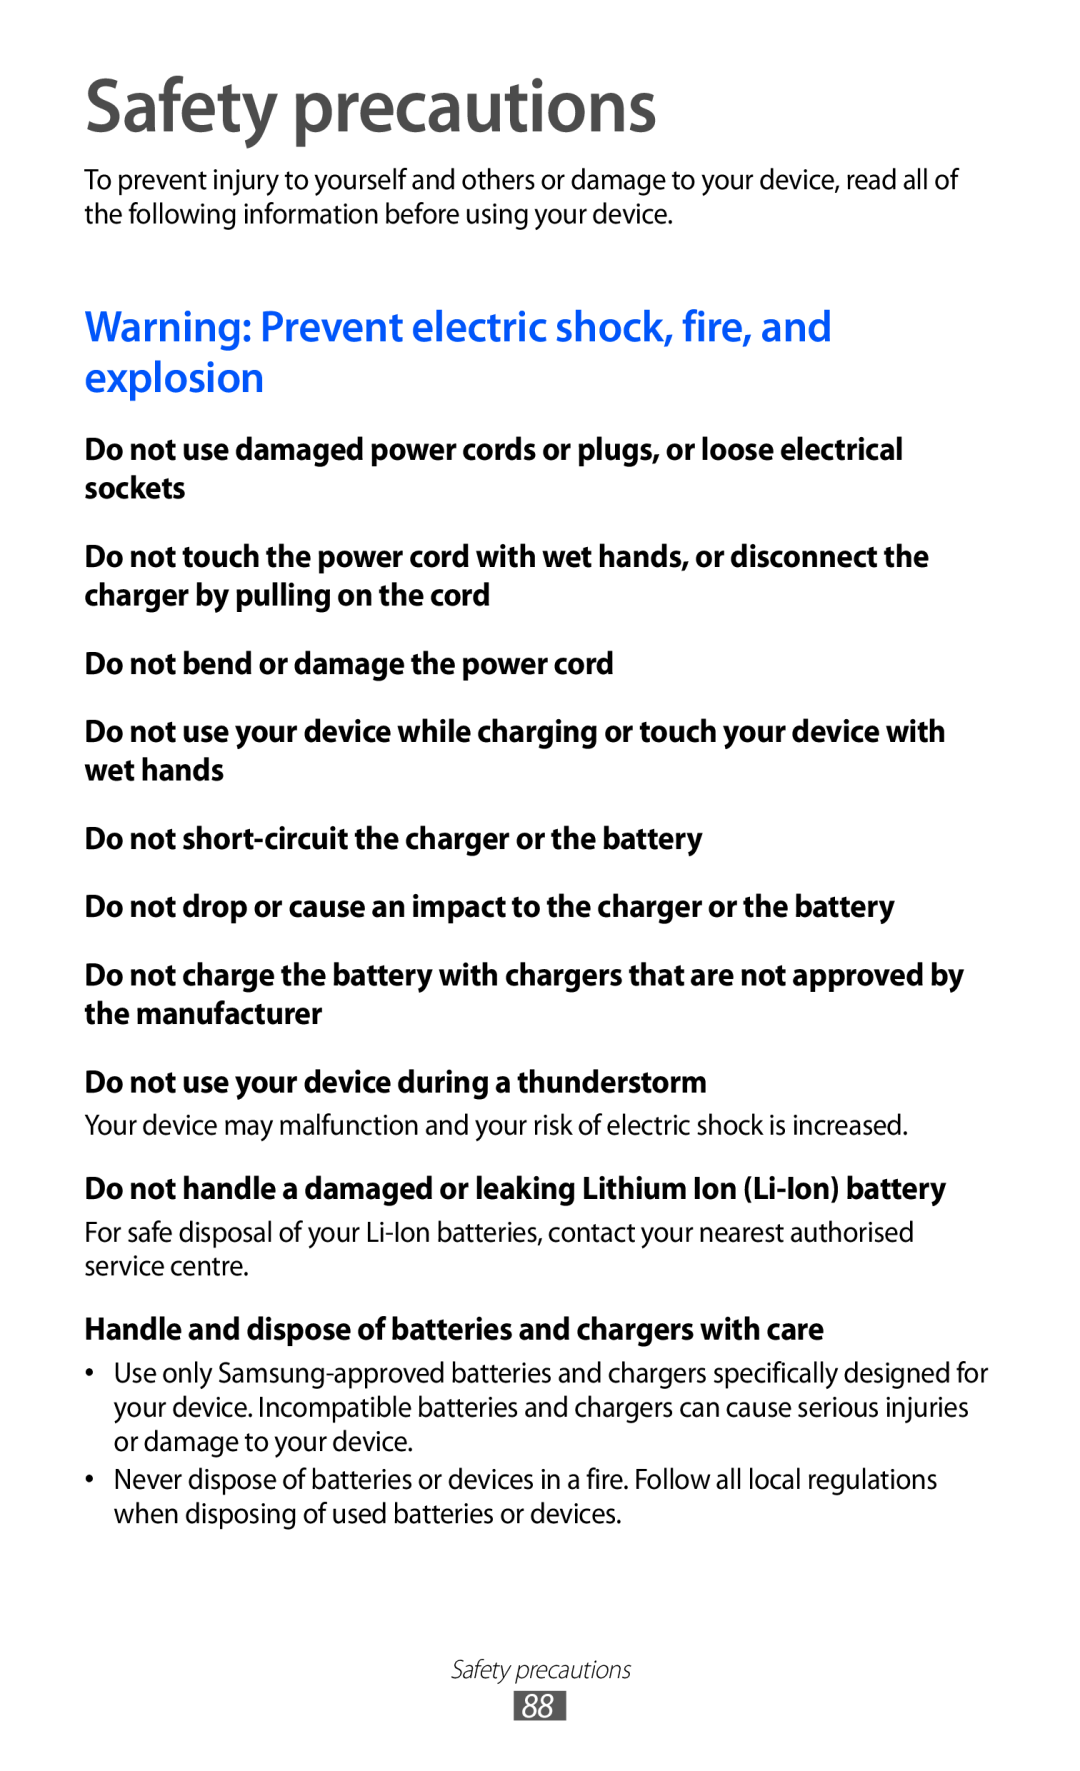 Samsung GT-P7510 user manual Safety precautions, Warning Prevent electric shock, fire, and explosion 